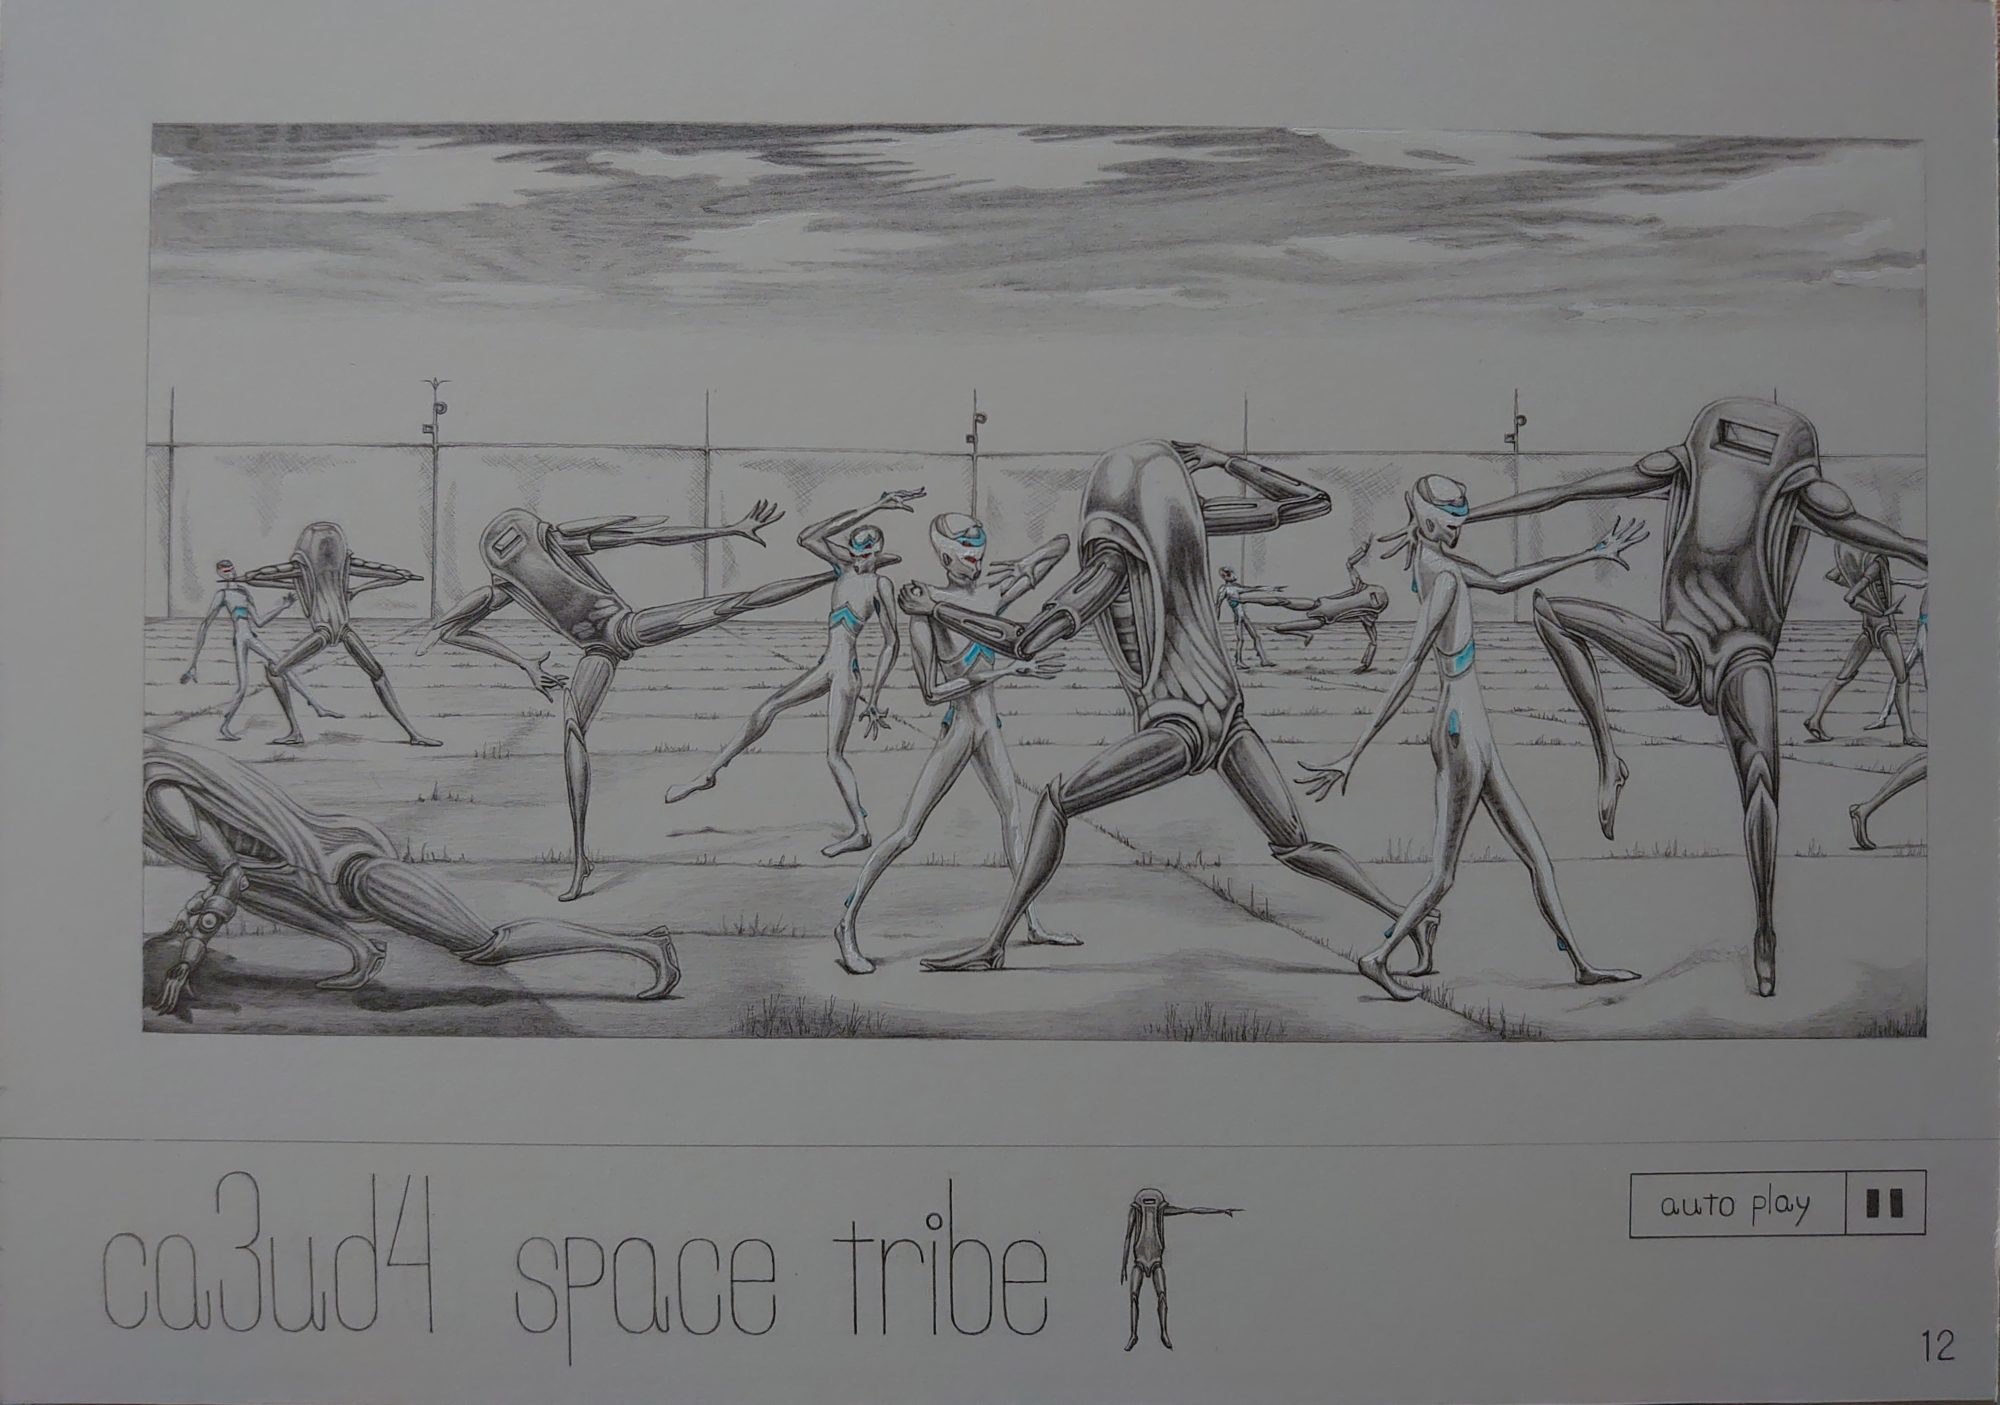 ca3ud4 space tribe